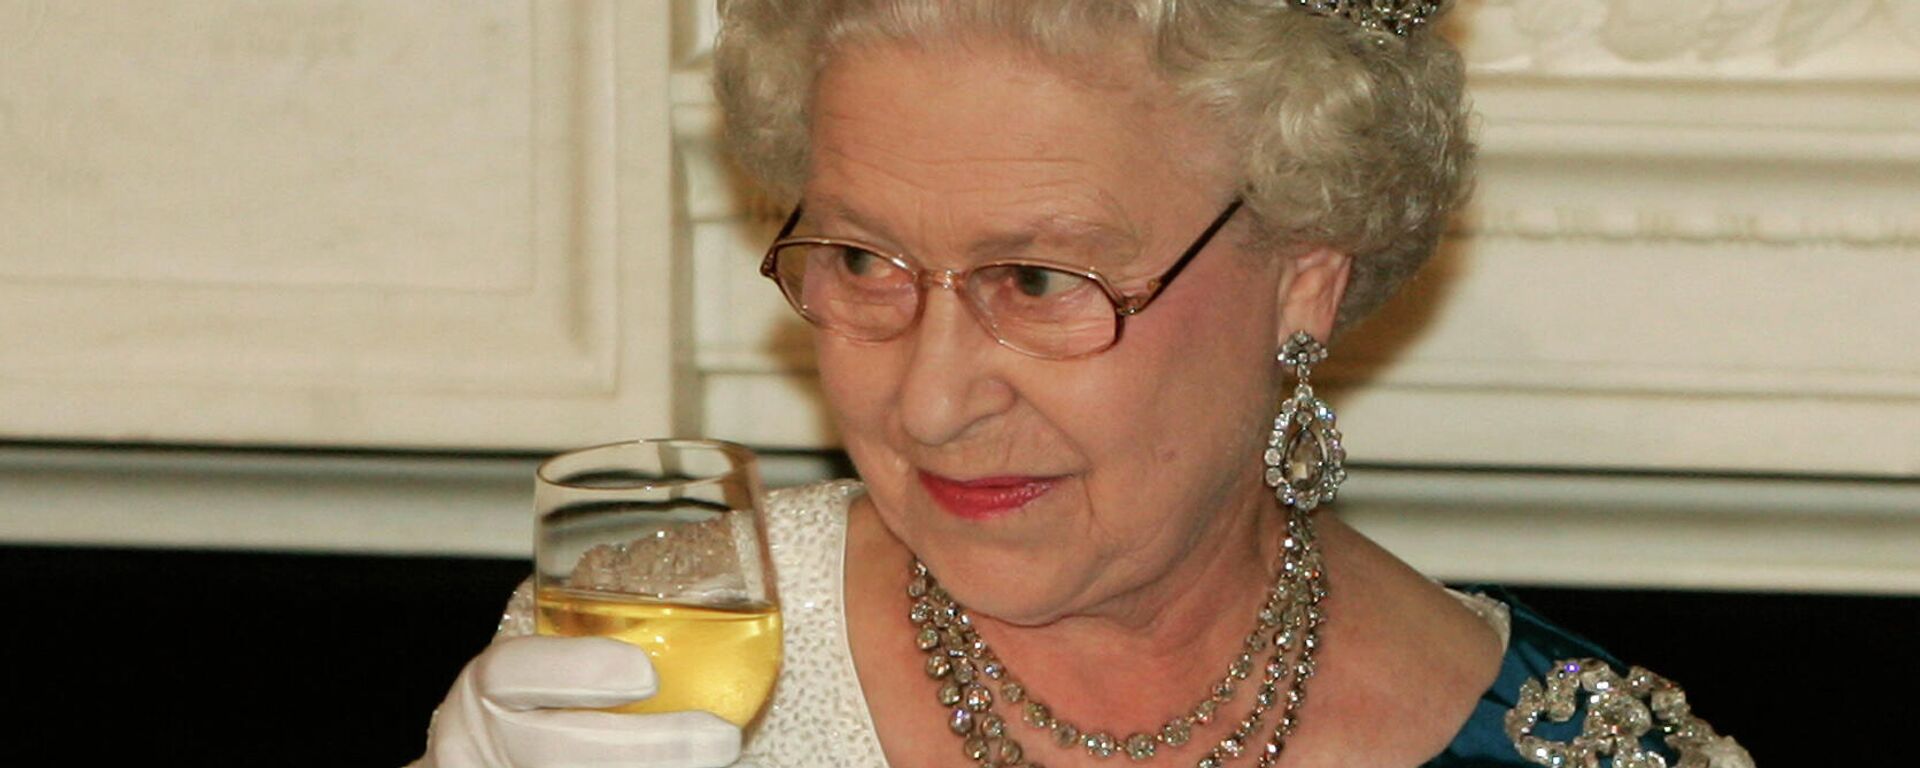 Queen Elizabeth II raises her glass after making a toast during a state dinner at the White House on Monday, May 7, 2007 in Washington - Sputnik International, 1920, 15.10.2021